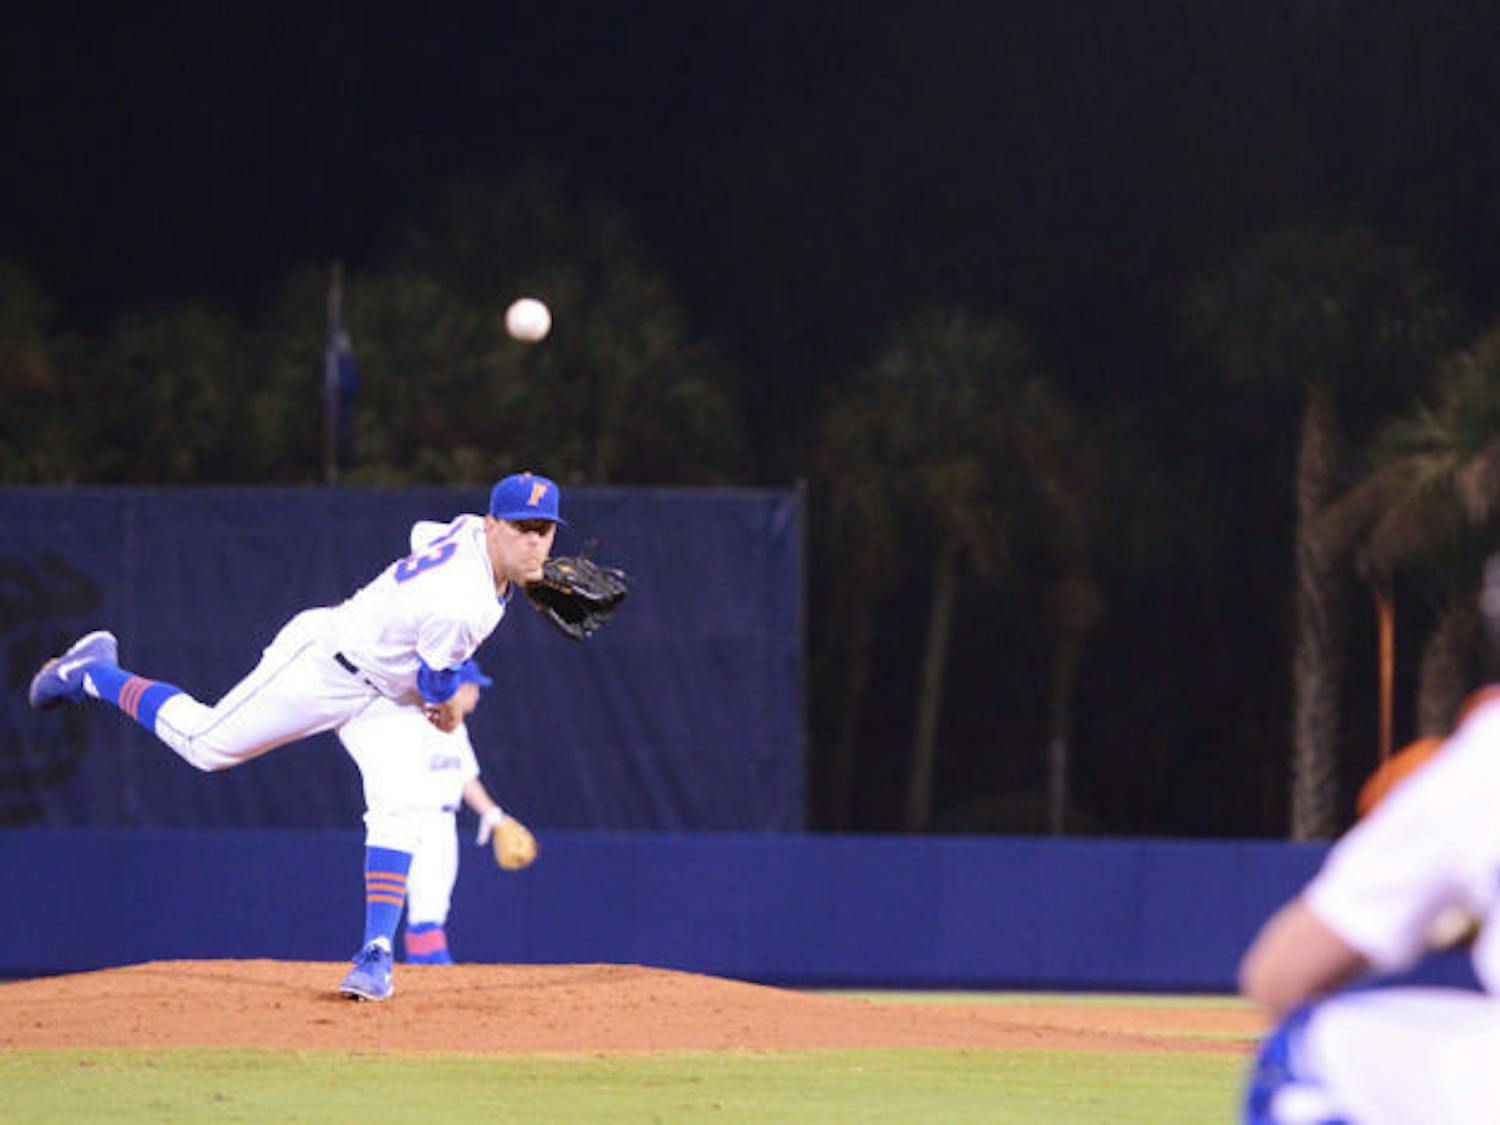 Right-handed starting pitcher Jonathon Crawford (23) throws a pitch during Florida’s 4-3 loss to Duke on Friday at McKethan Stadium. Crawford threw a career-high 103 pitches during six innings of work in Florida's 3-2 loss to Miami on Friday.